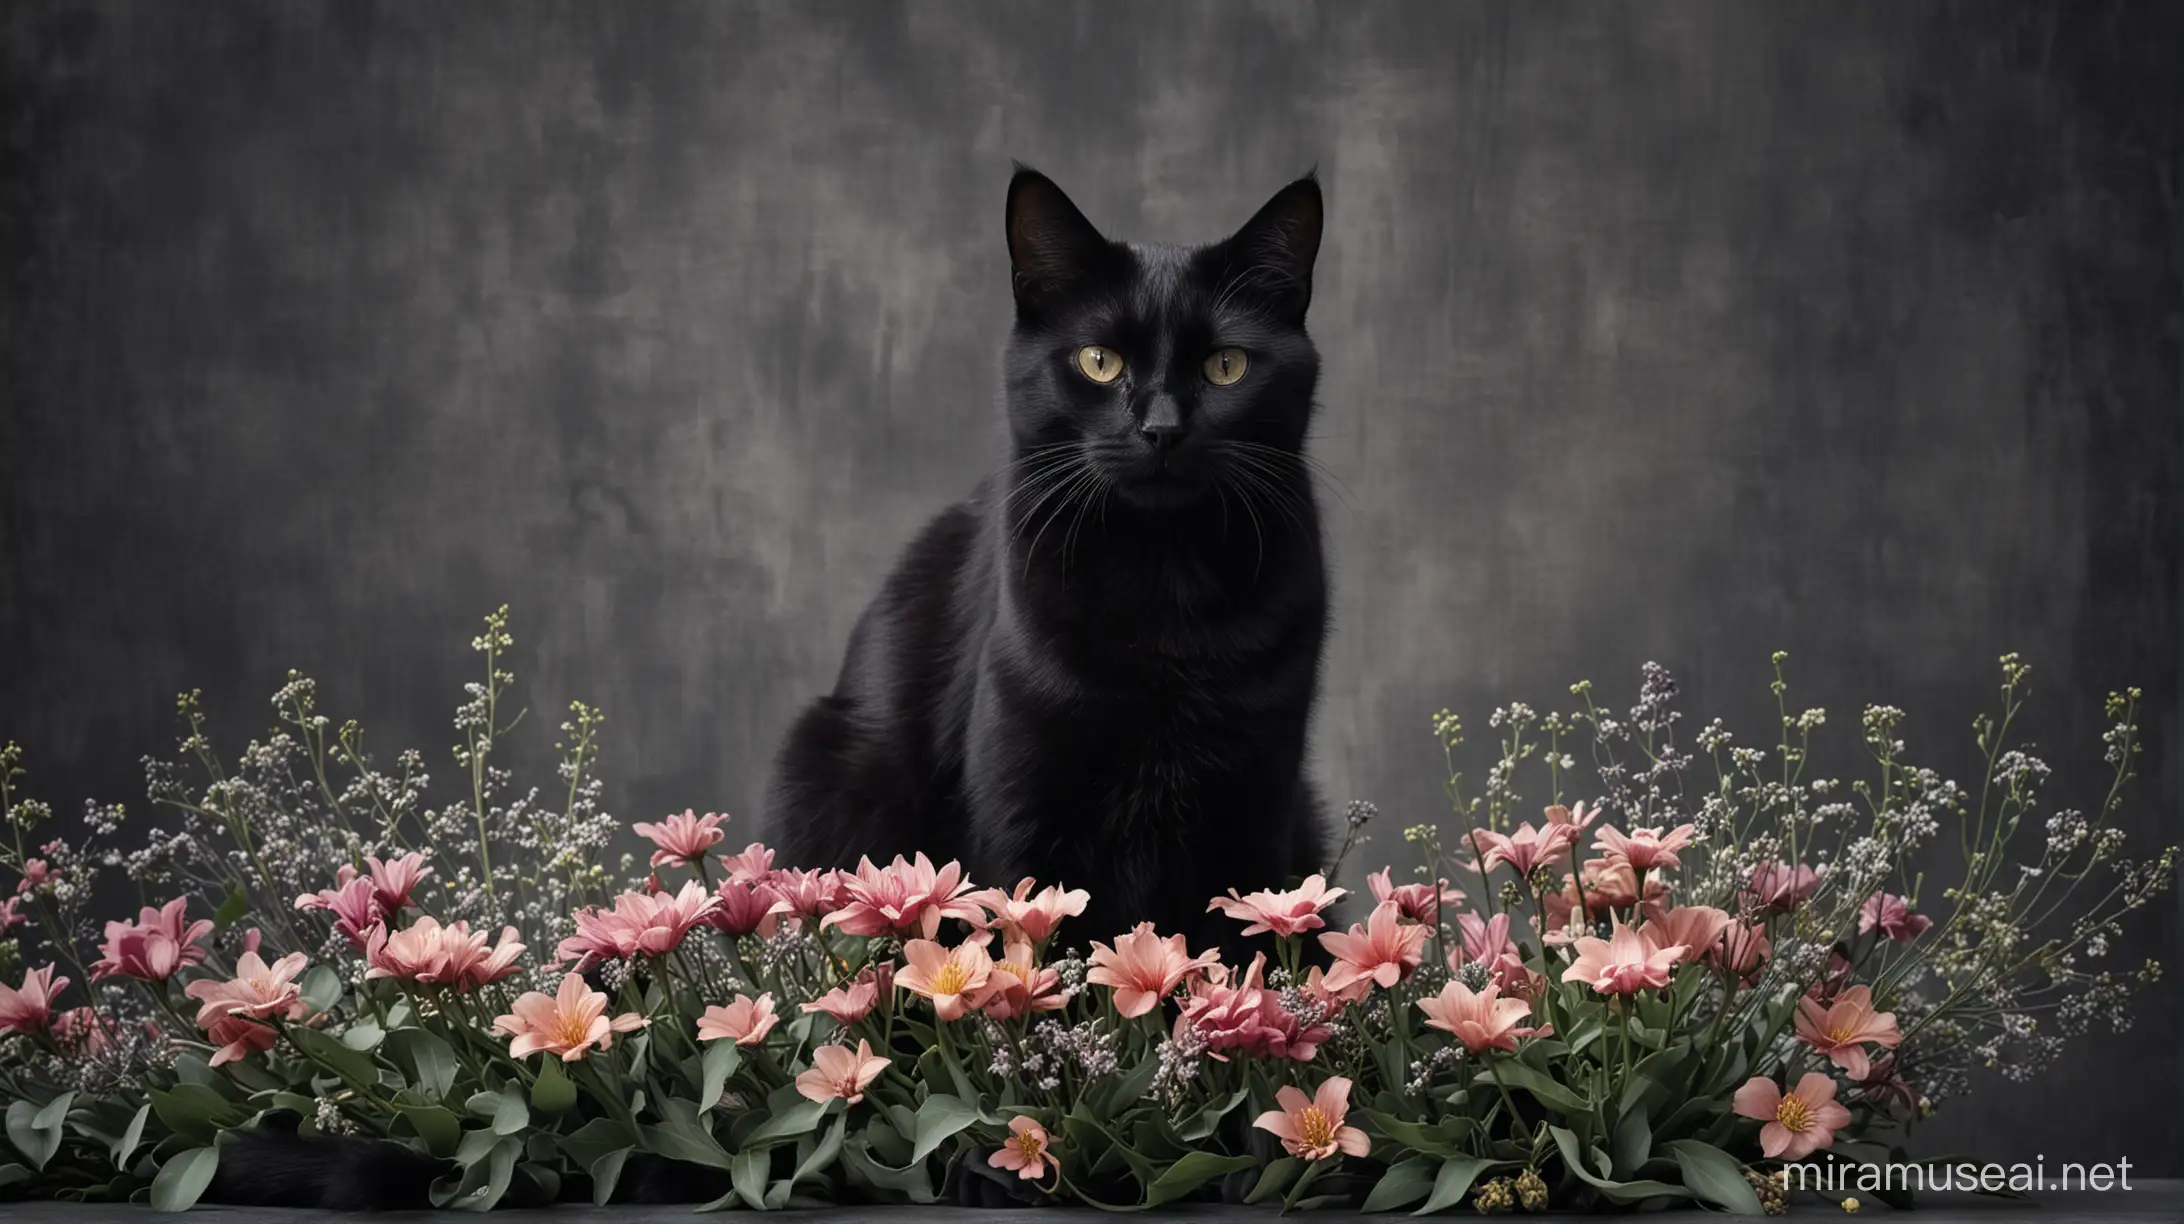 a black cat sitting on a grey bad, flowers, capturing moments, dark colors, ultra-high quality, blurry front
 --version 6 --stylize 200